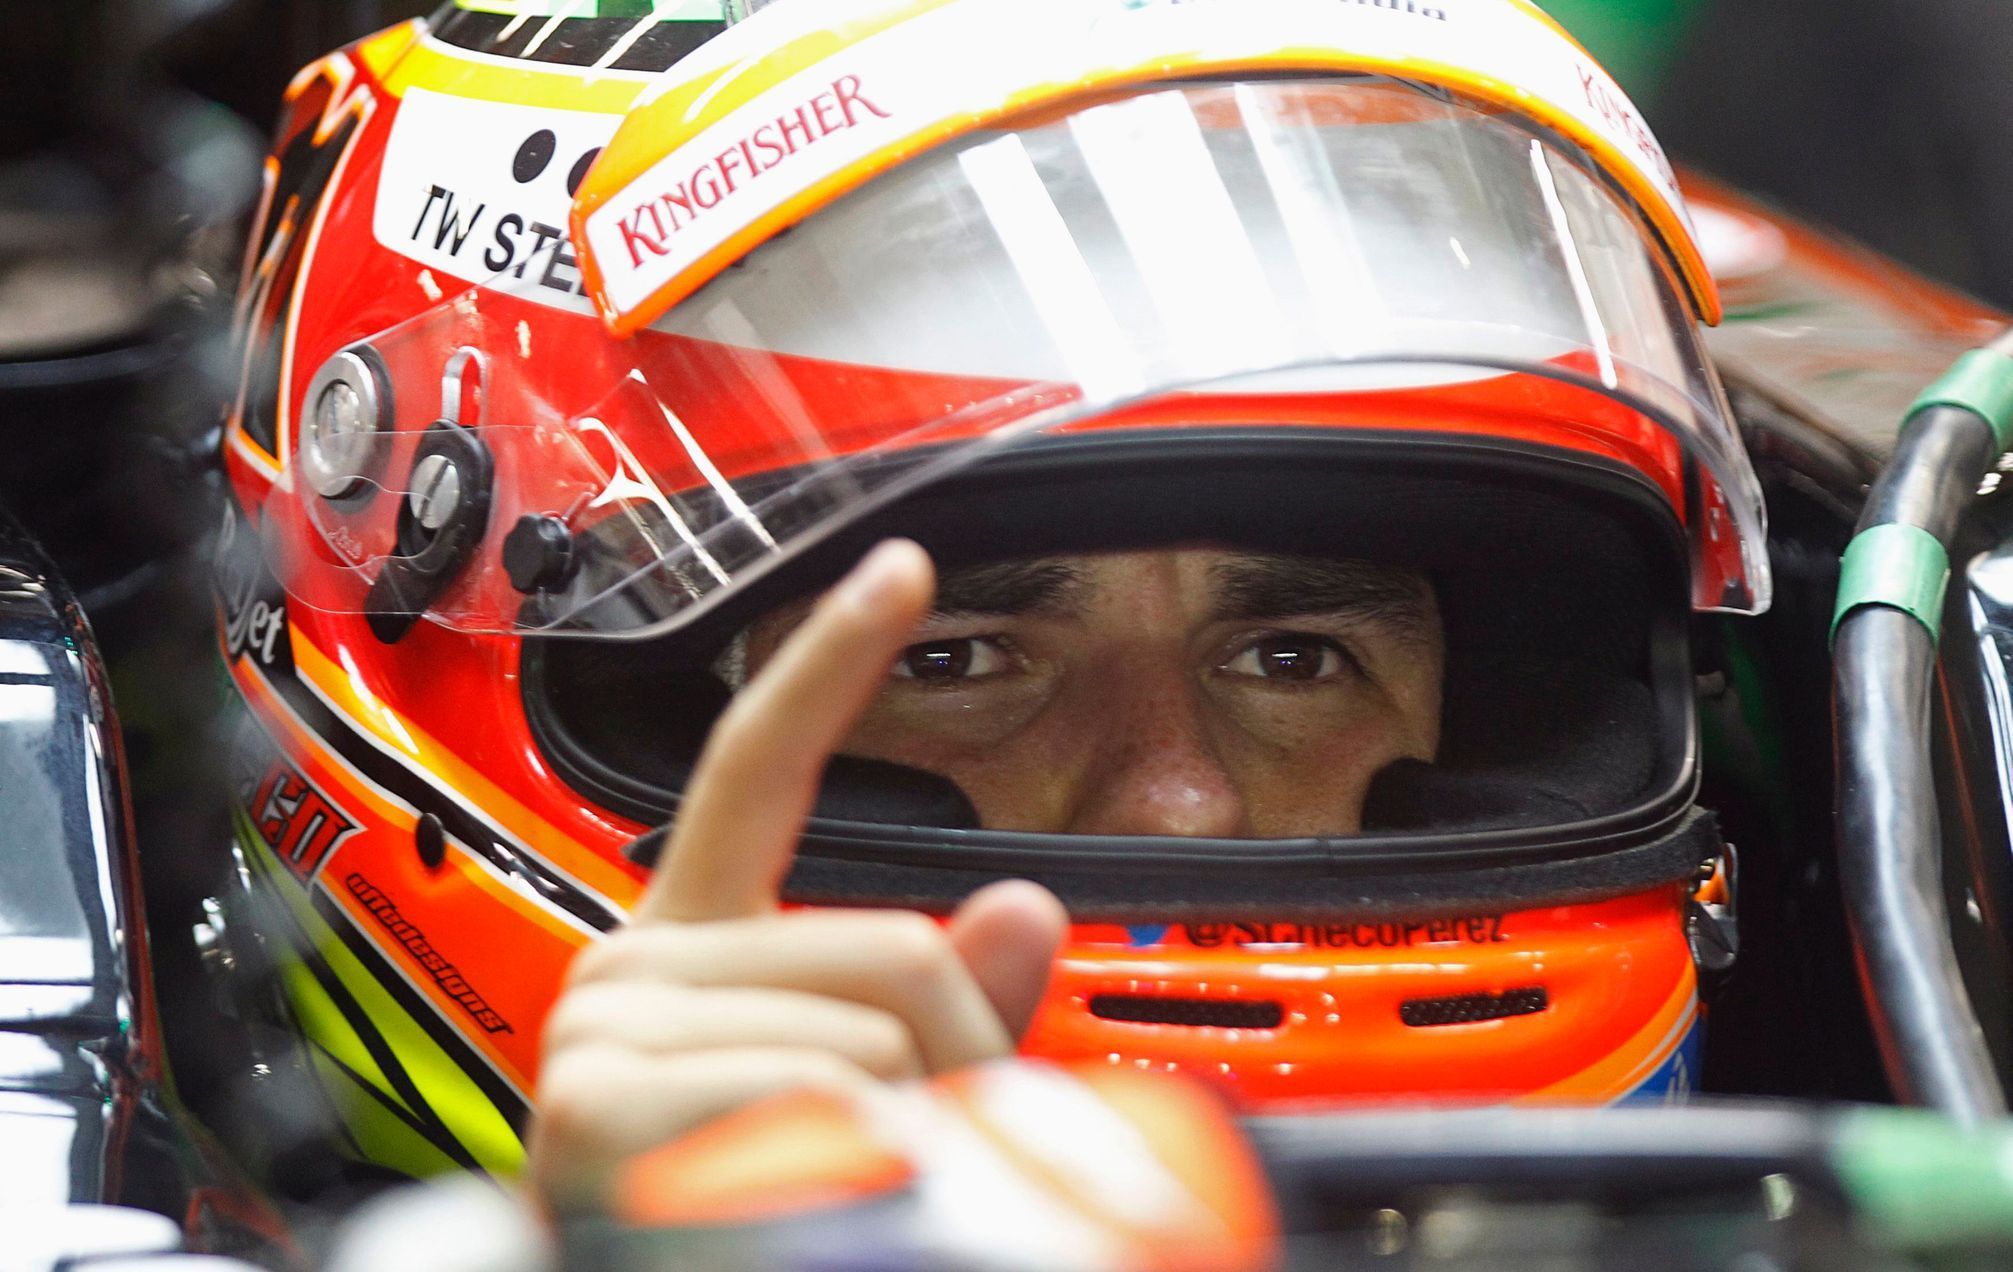 Force India Formula One driver Sergio Perez of Mexico gestures in his car during the second practice session of the Singapore F1 Grand Prix at the Marina Bay street circuit in Singapore